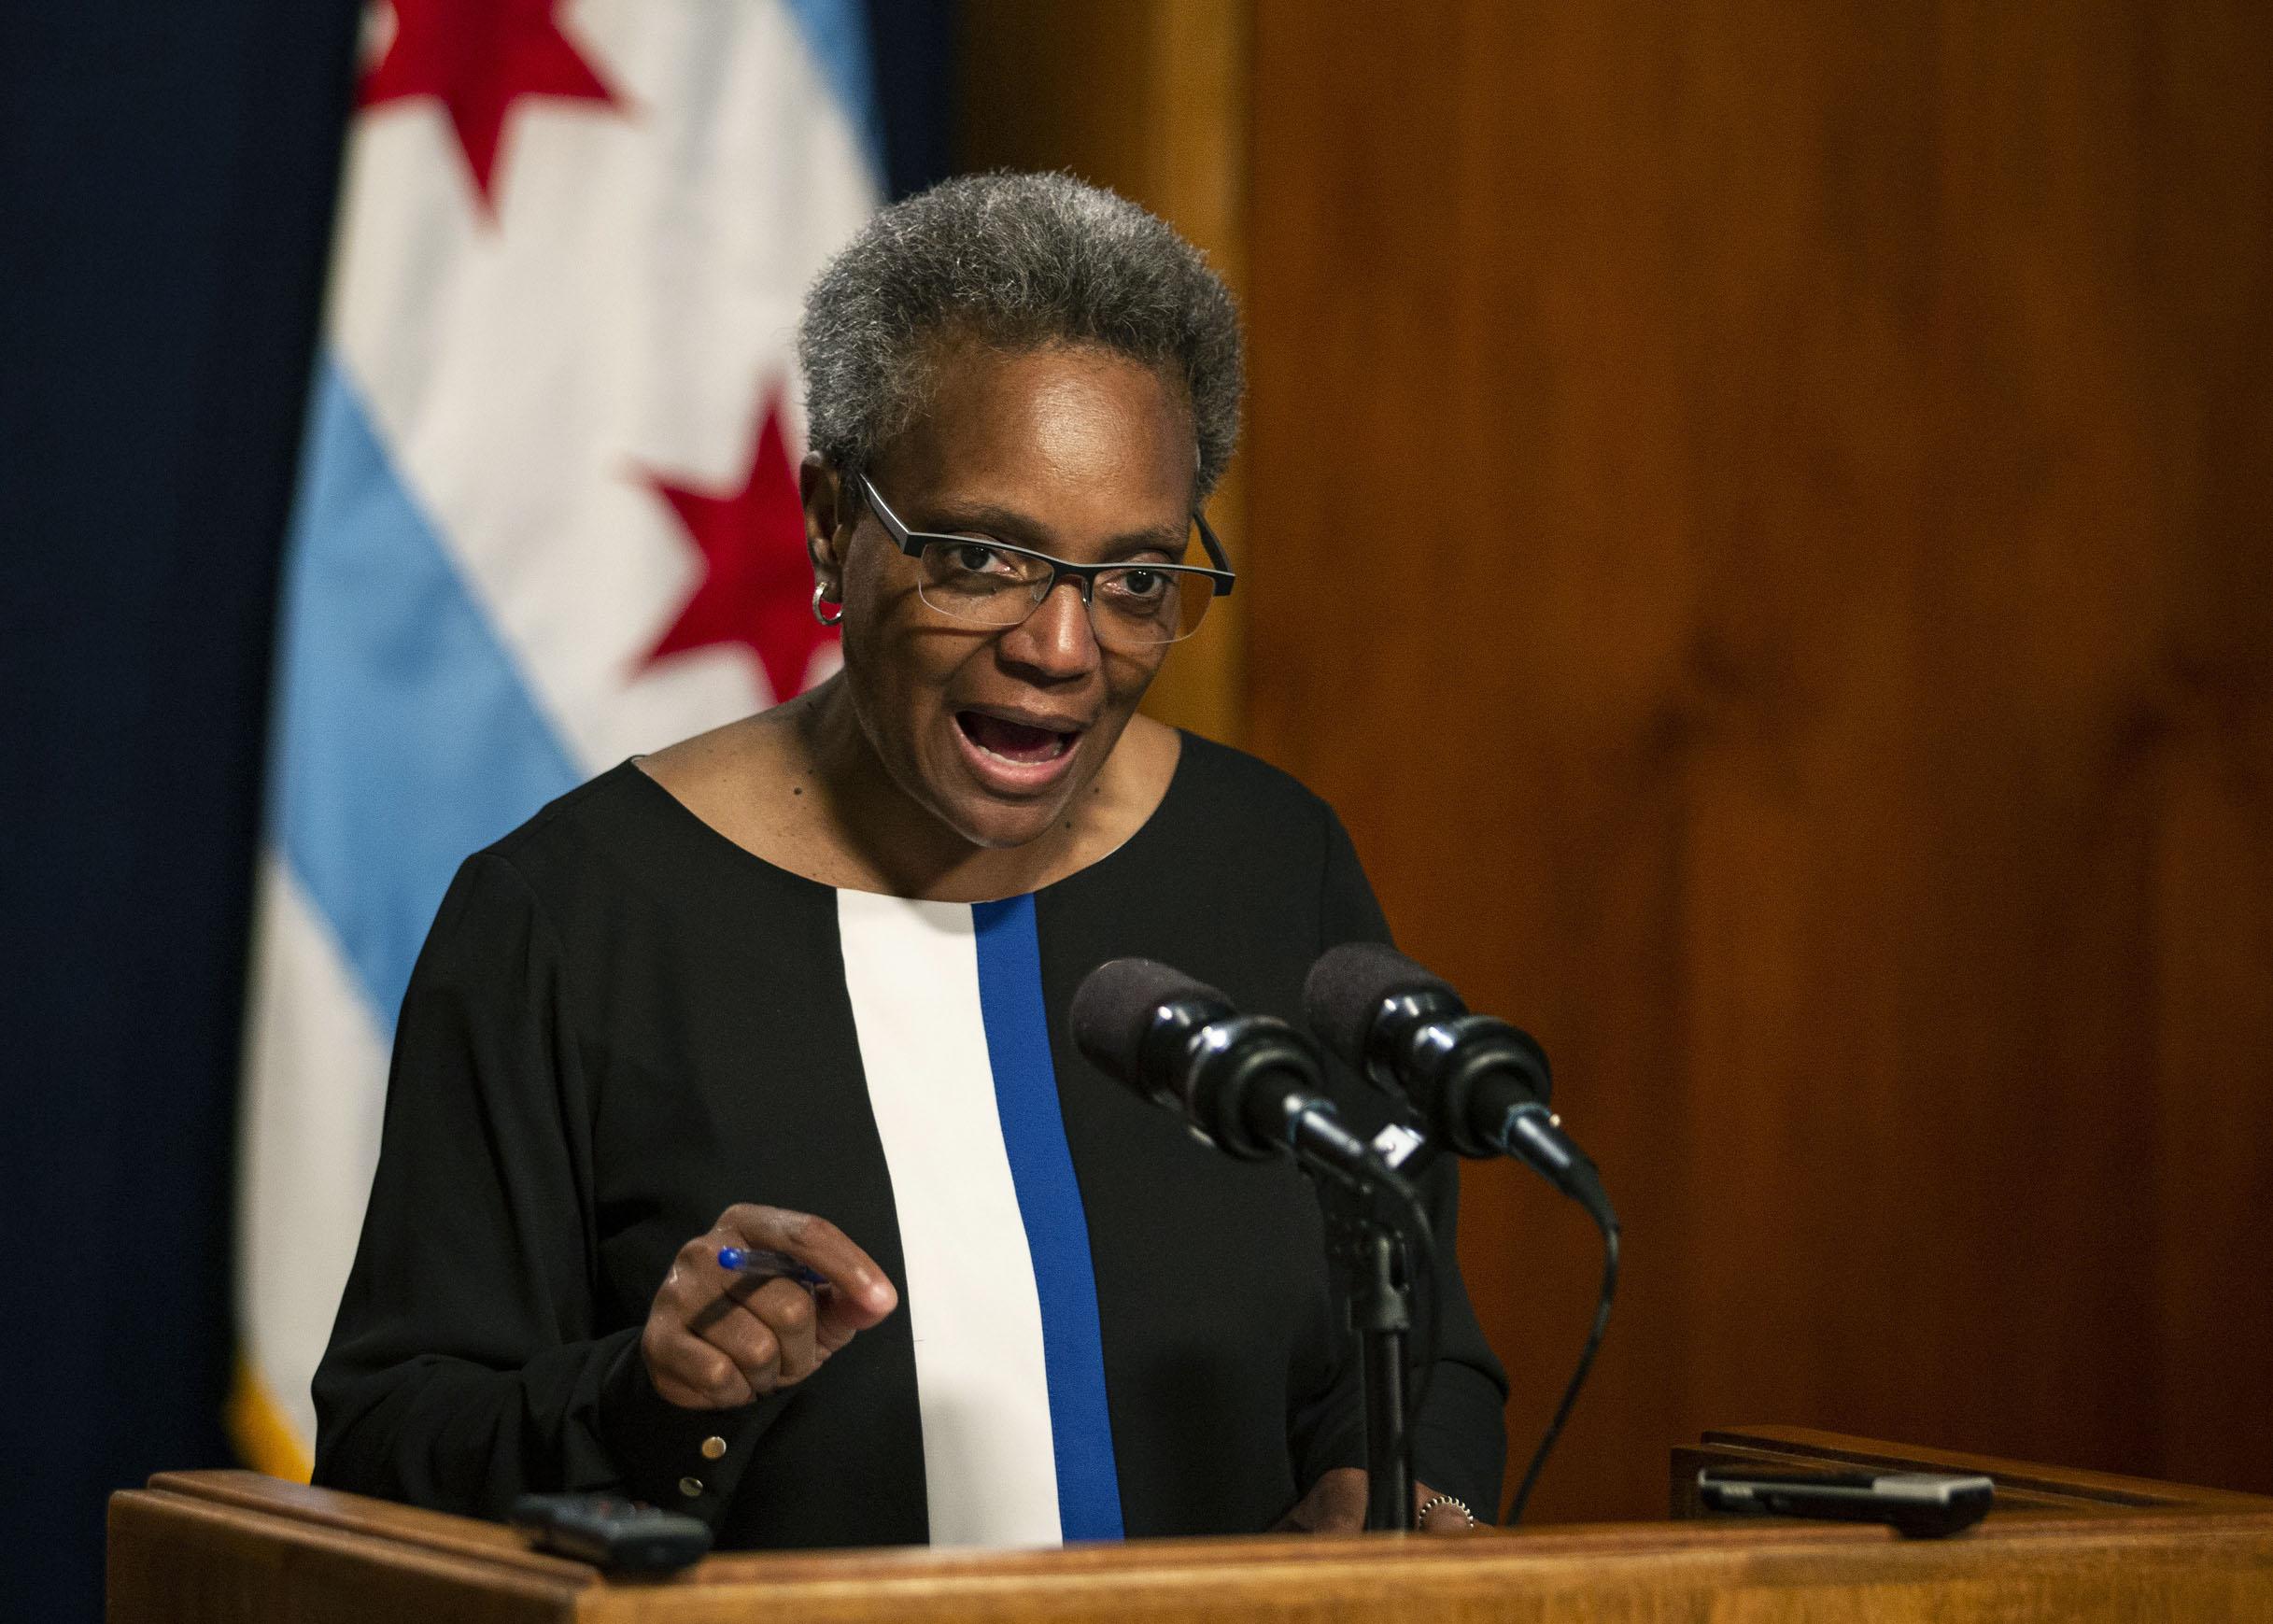 Chicago Mayor Lori Lightfoot holds a press conference Friday, May 31, 2019 at City Hall to address the federal indictment filed against Ald. Ed Burke and demand he resign immediately. (Ashlee Rezin / Chicago Sun-Times via AP)